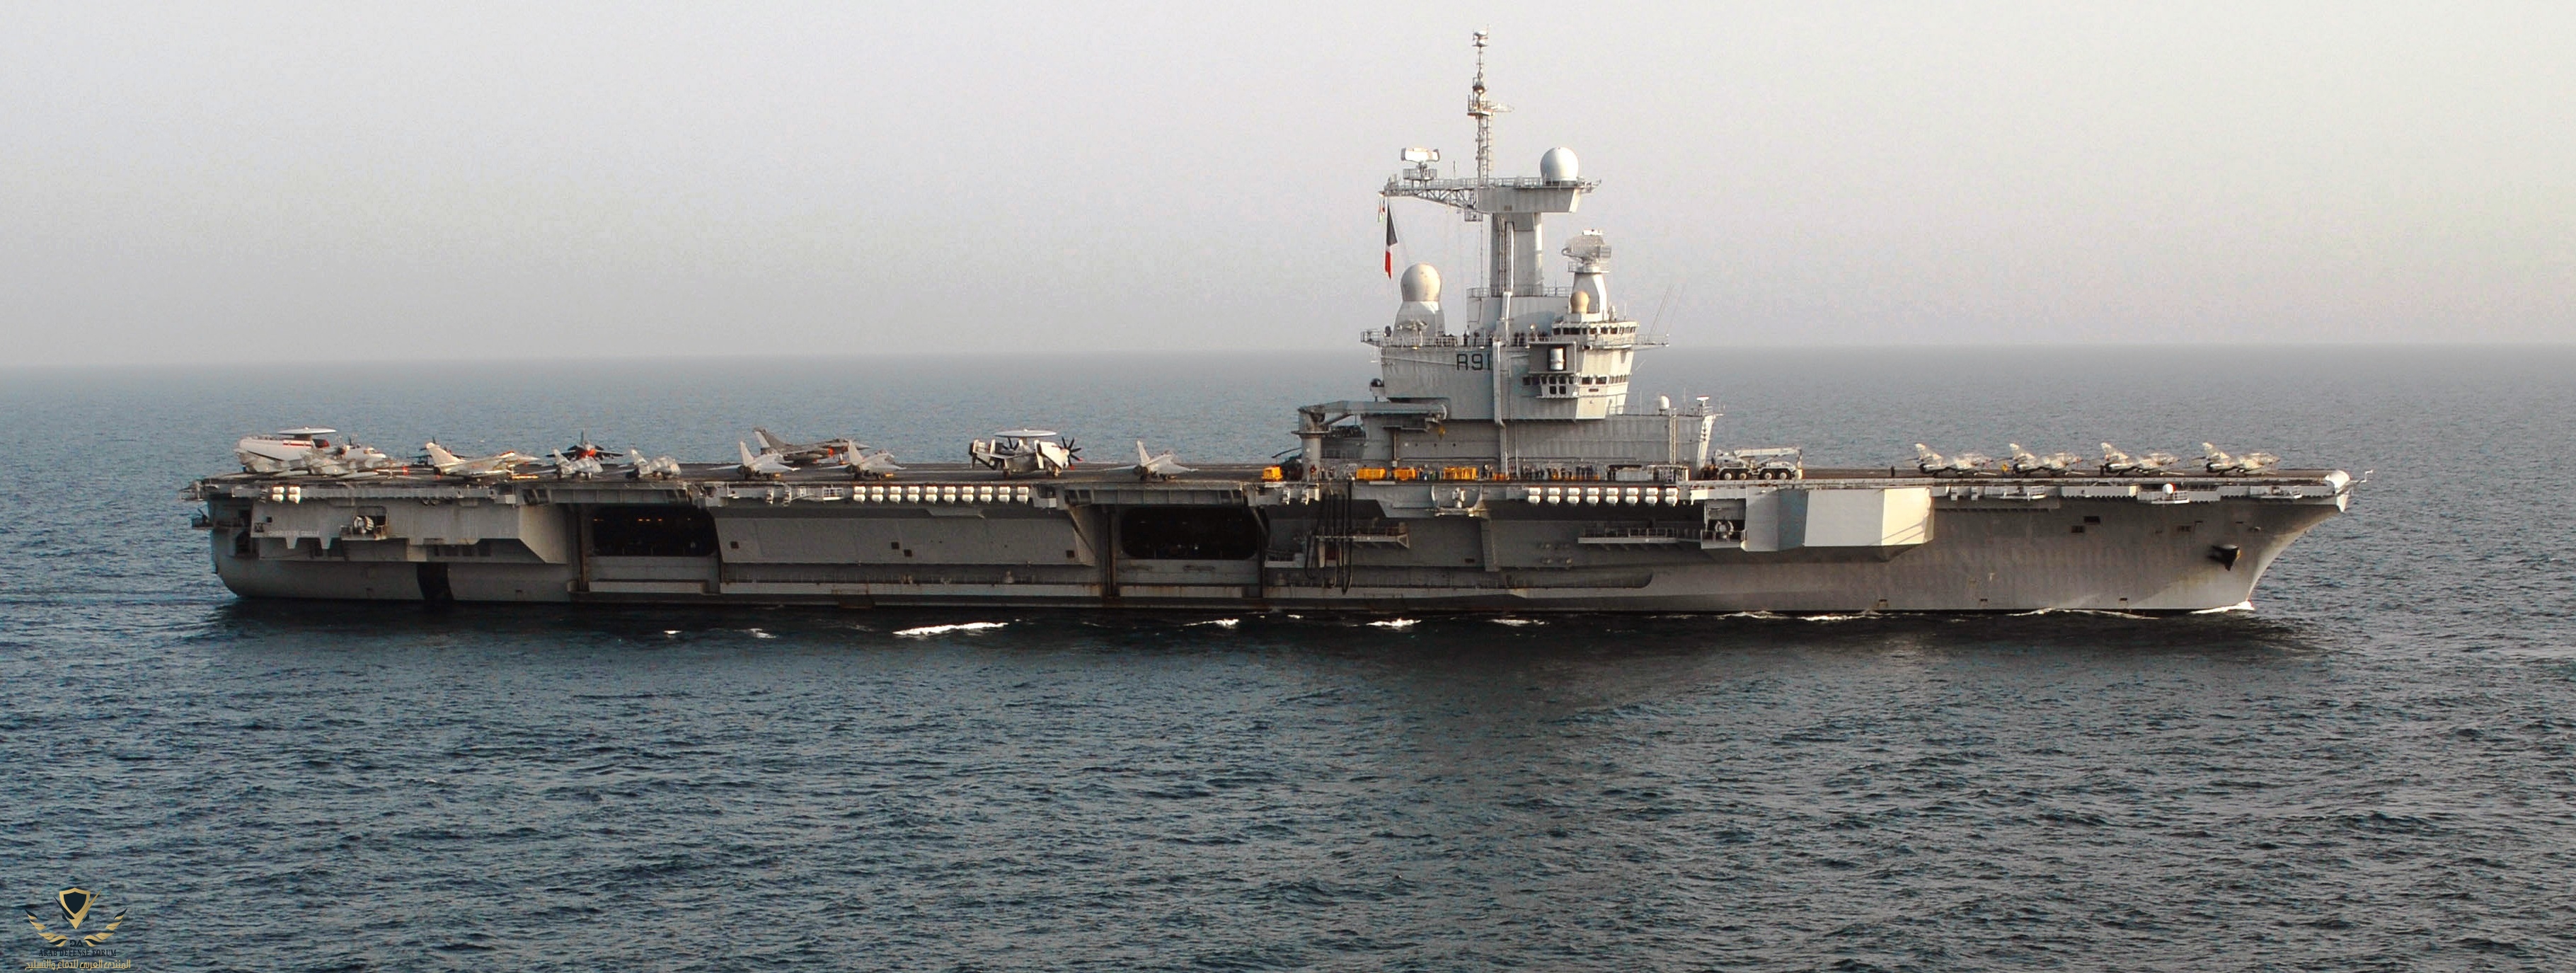 French_nuclear-powered_aircraft_carrier_Charles_de_Gaulle.JPEG